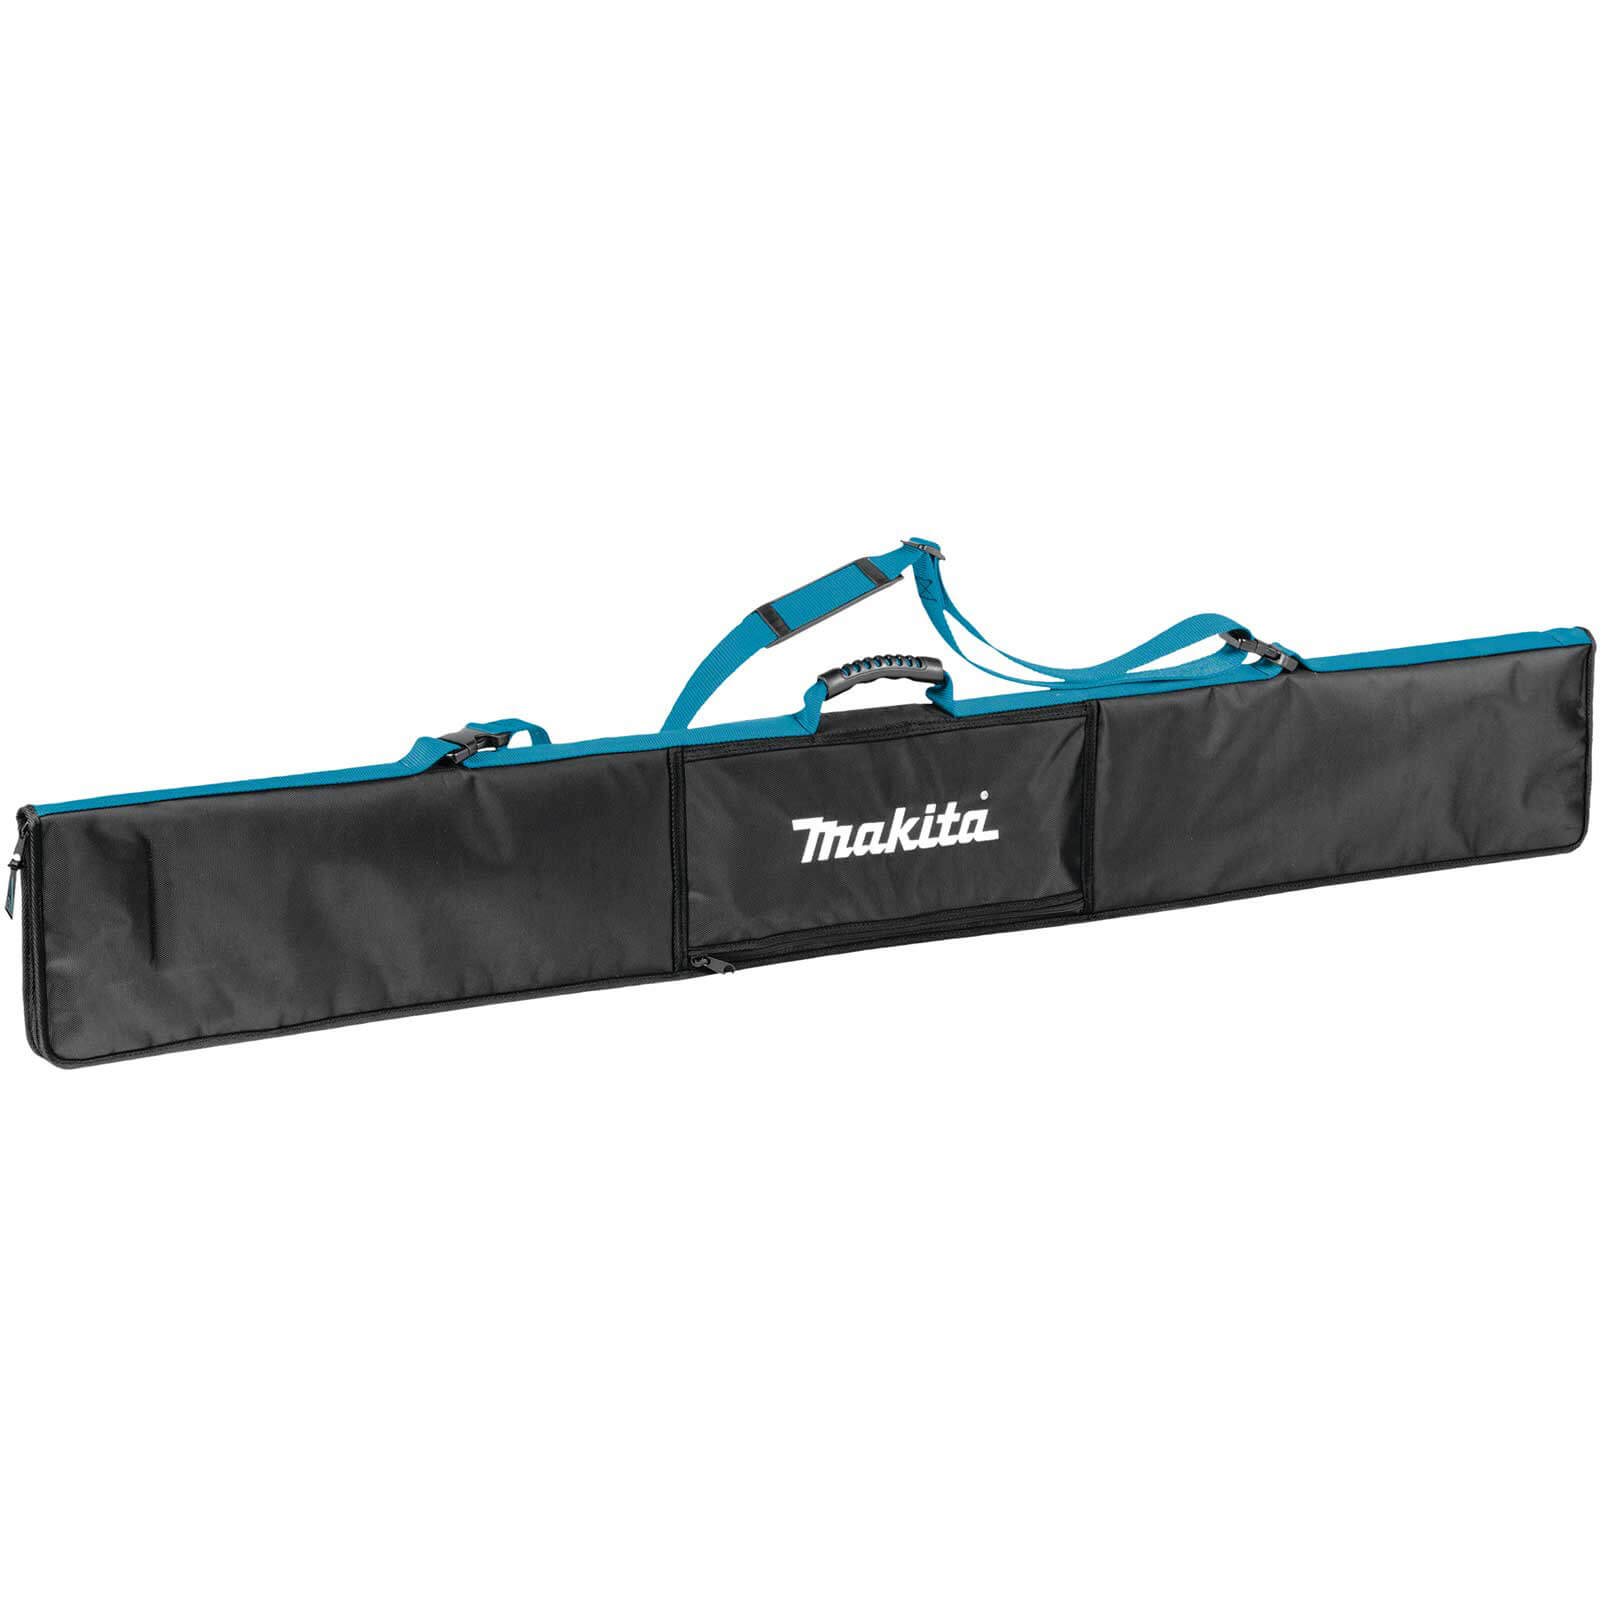 Photo of Makita Plunge Saw Guide Rail Carry Bag 1500mm